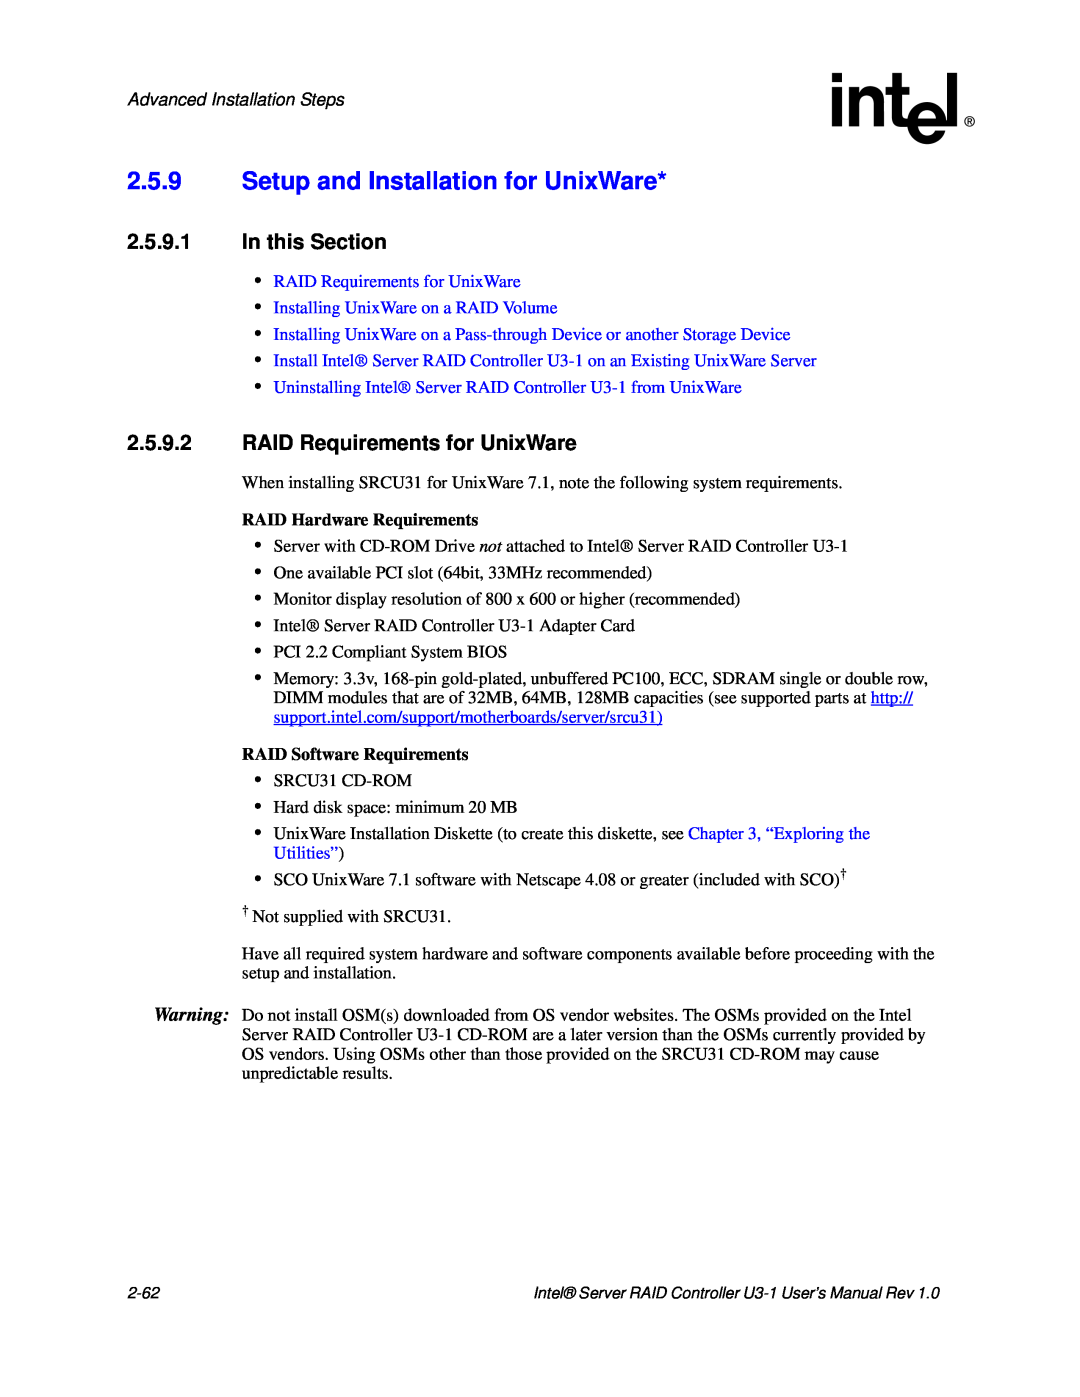 Intel SRCU31 user manual 2.5.9.1In this Section, 2.5.9.2RAID Requirements for UnixWare, Advanced Installation Steps 